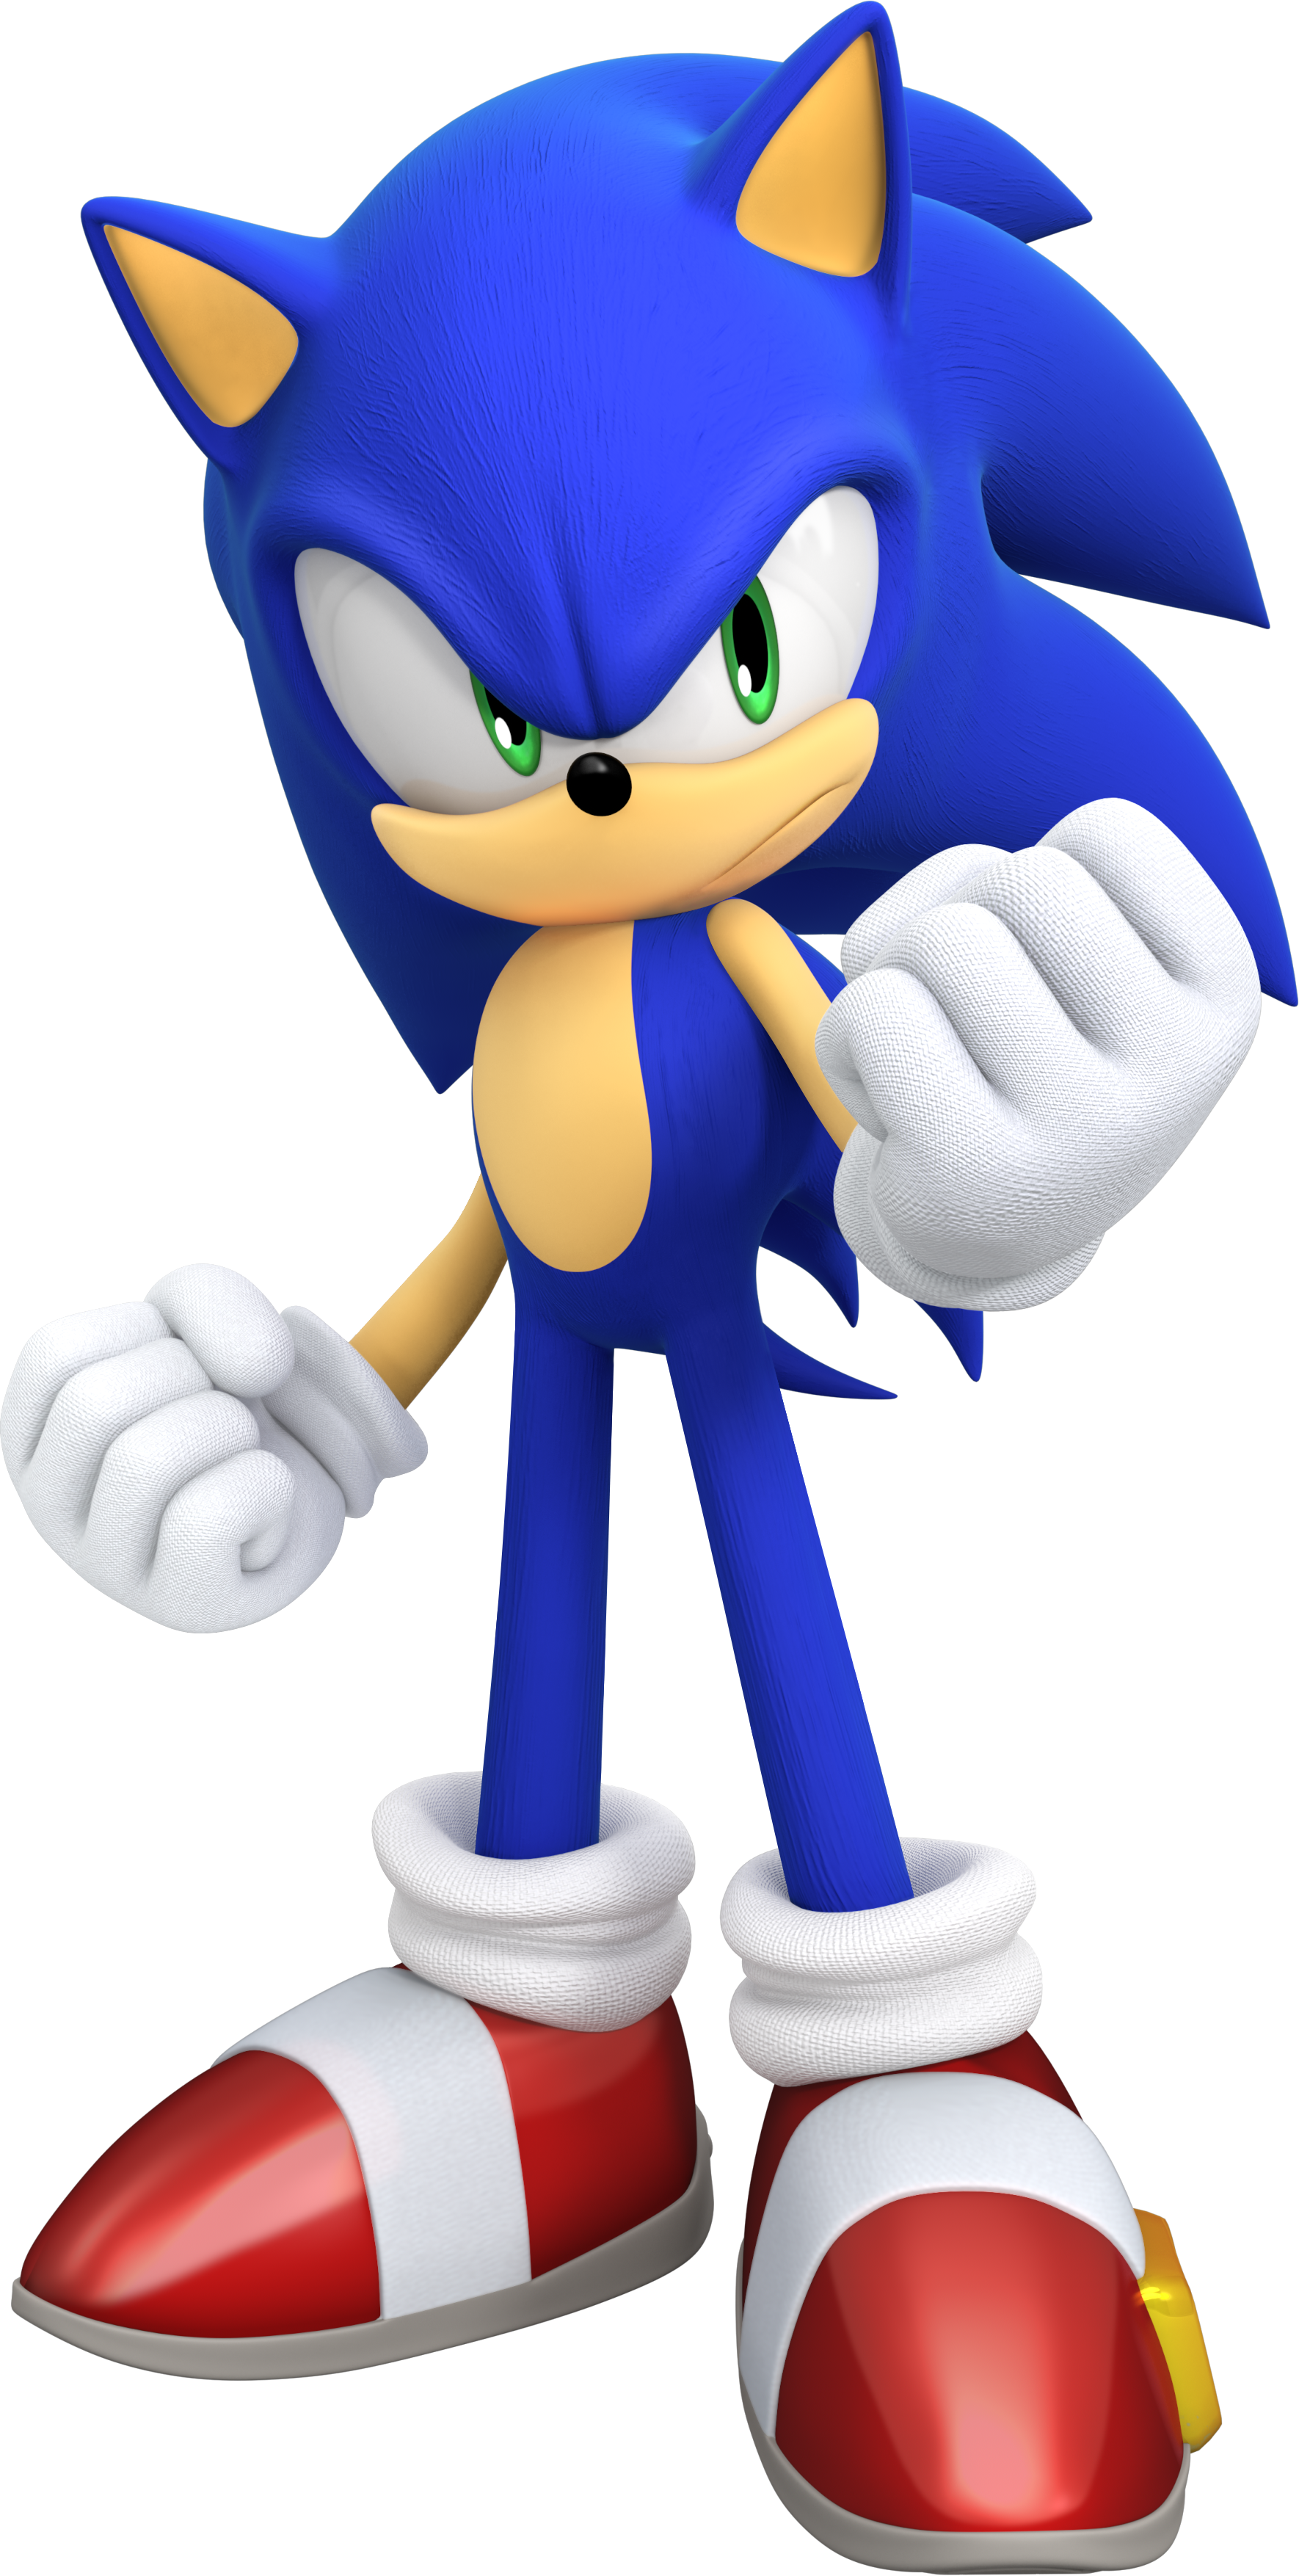 Sonic The Hedgehog PNG - 171536